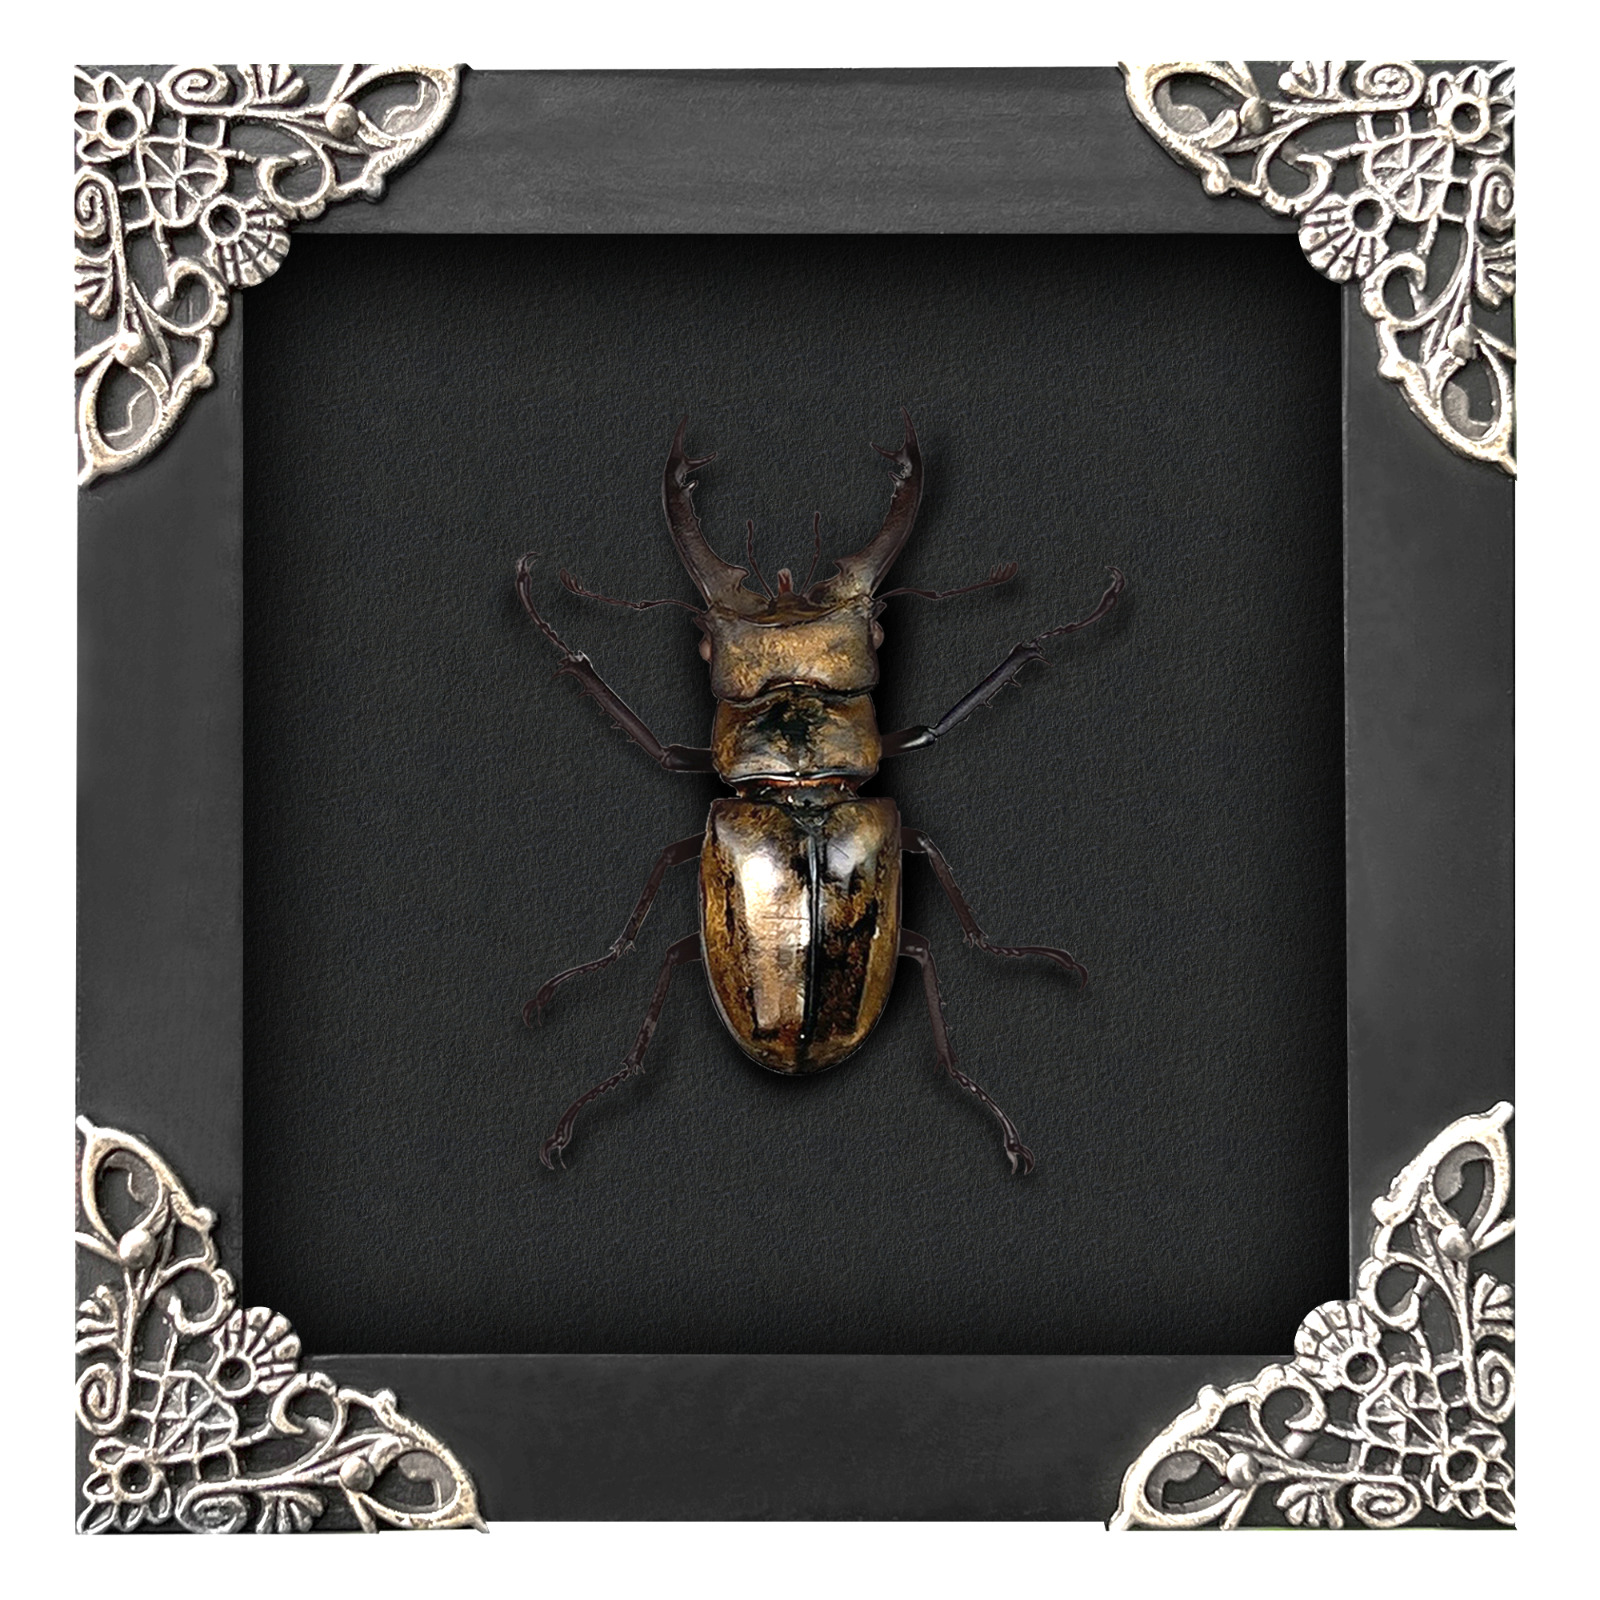 Handmade Framed Beetle Collection Wall Hanging Decor Insect Shadow Box Goth Art